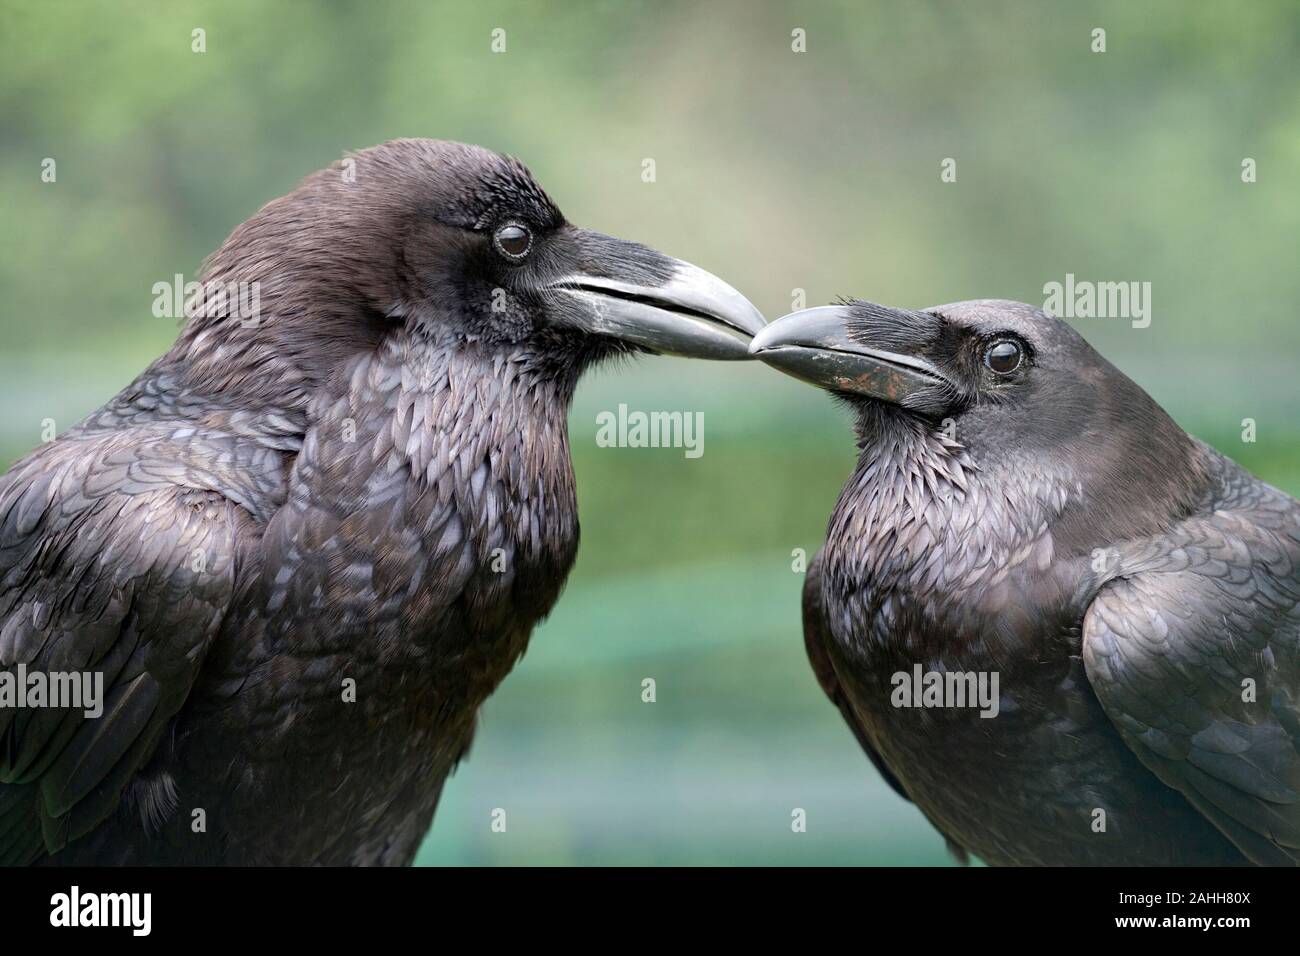 RAVEN pair (Corvus corax). Bill length, tender, affectionate, touch, between a true pair. Sexually monomorphic, plumage. Tower of London. UK. Stock Photo